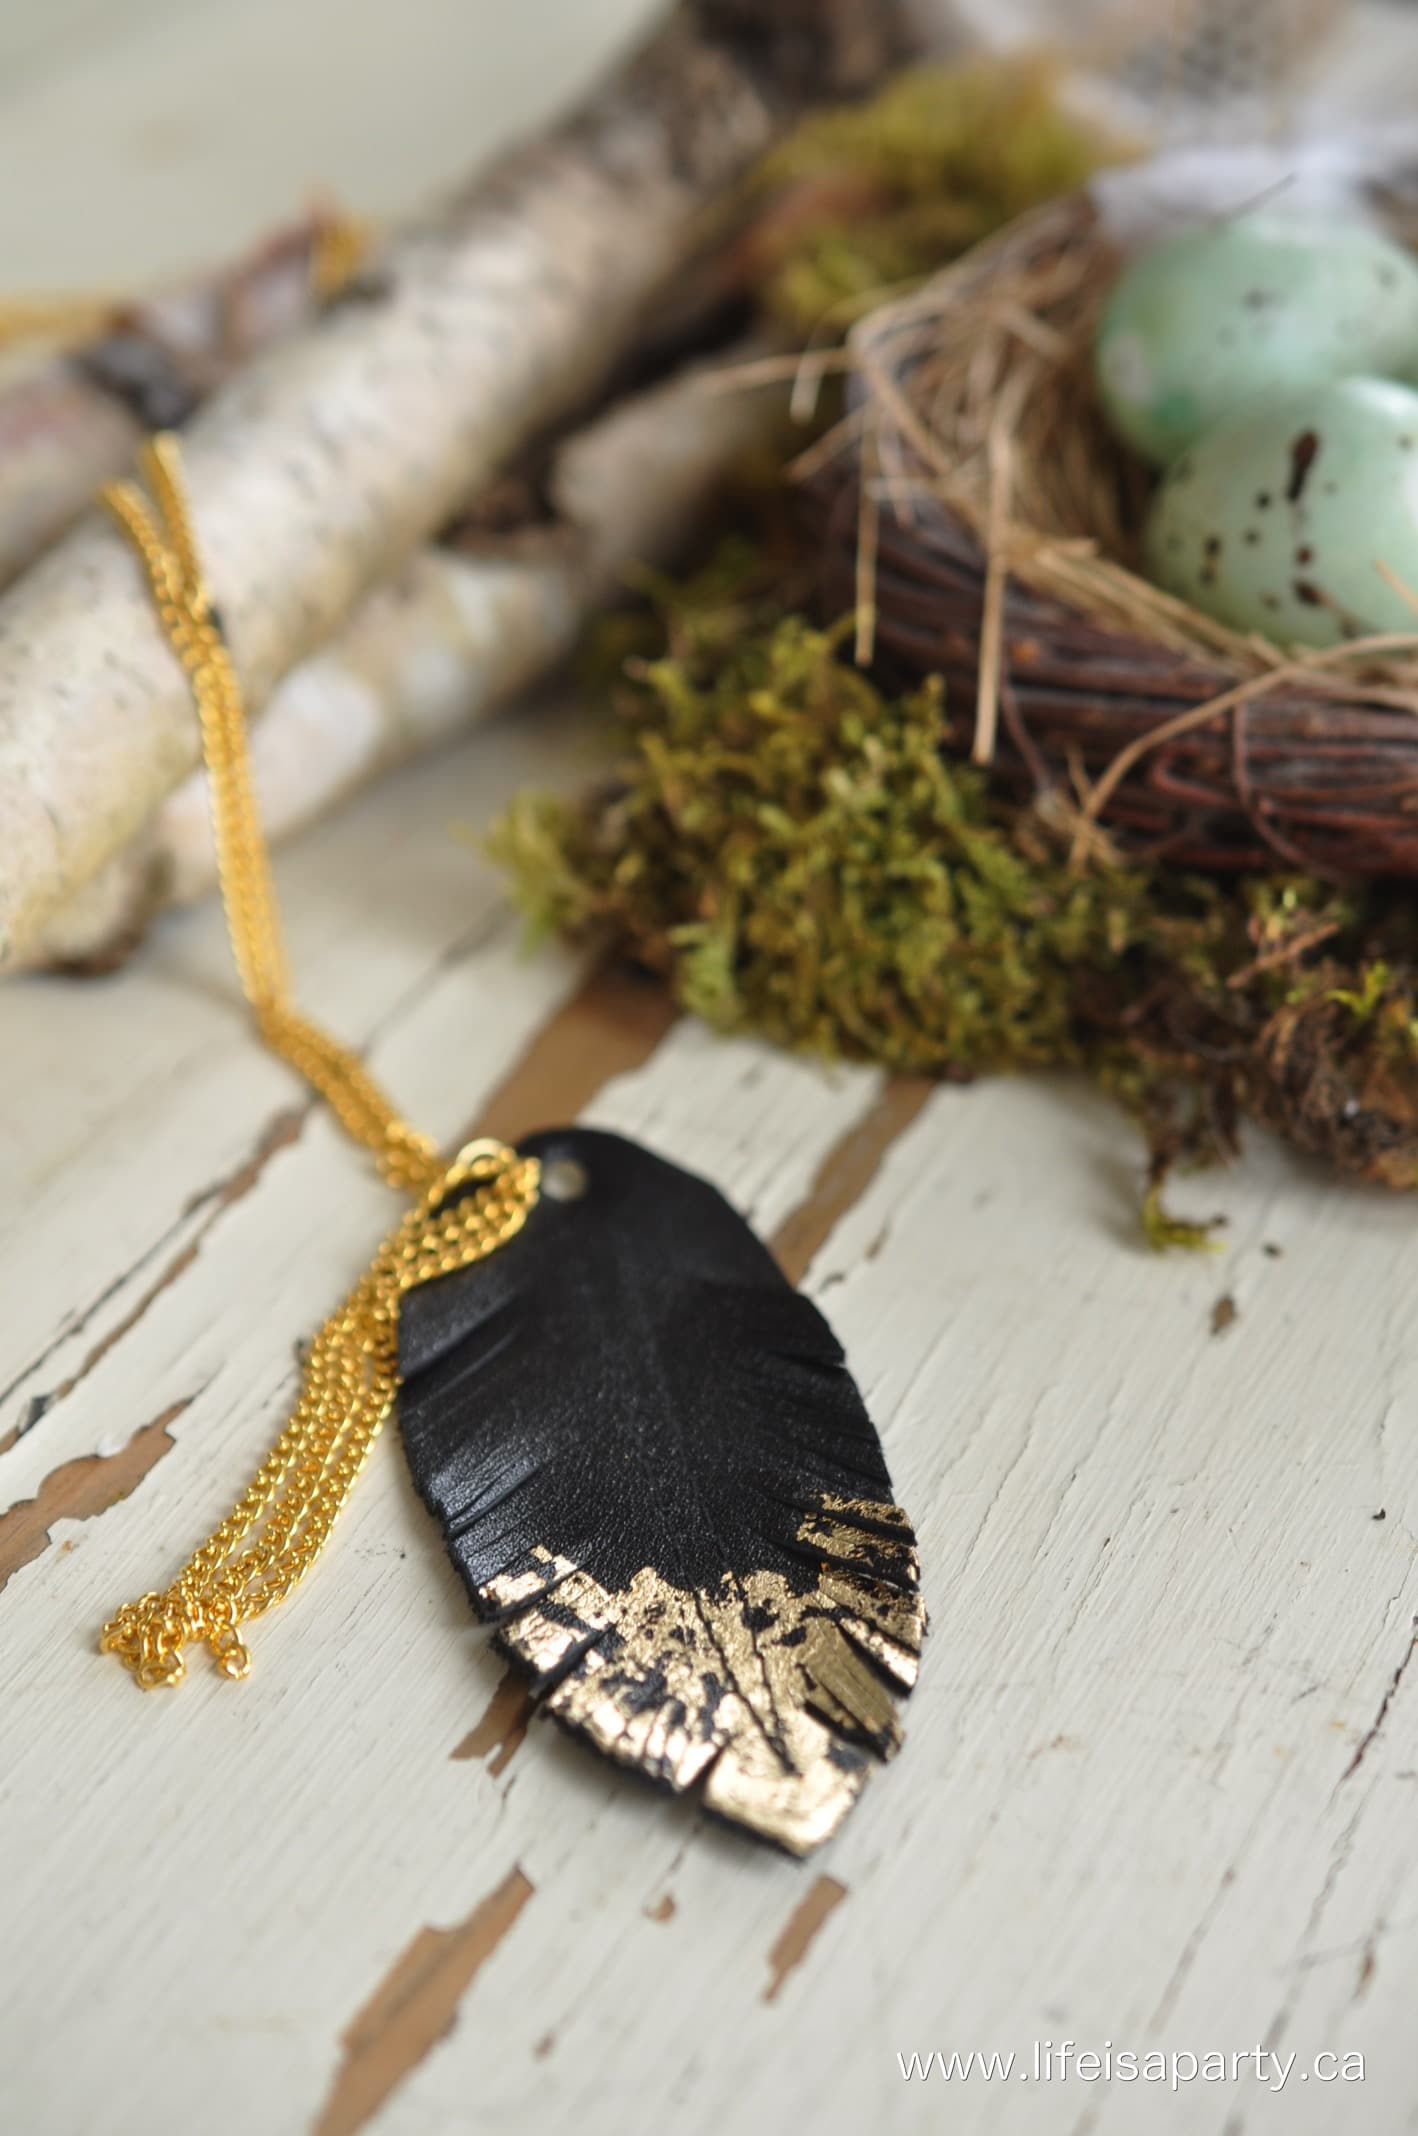 Leather Feather Necklace